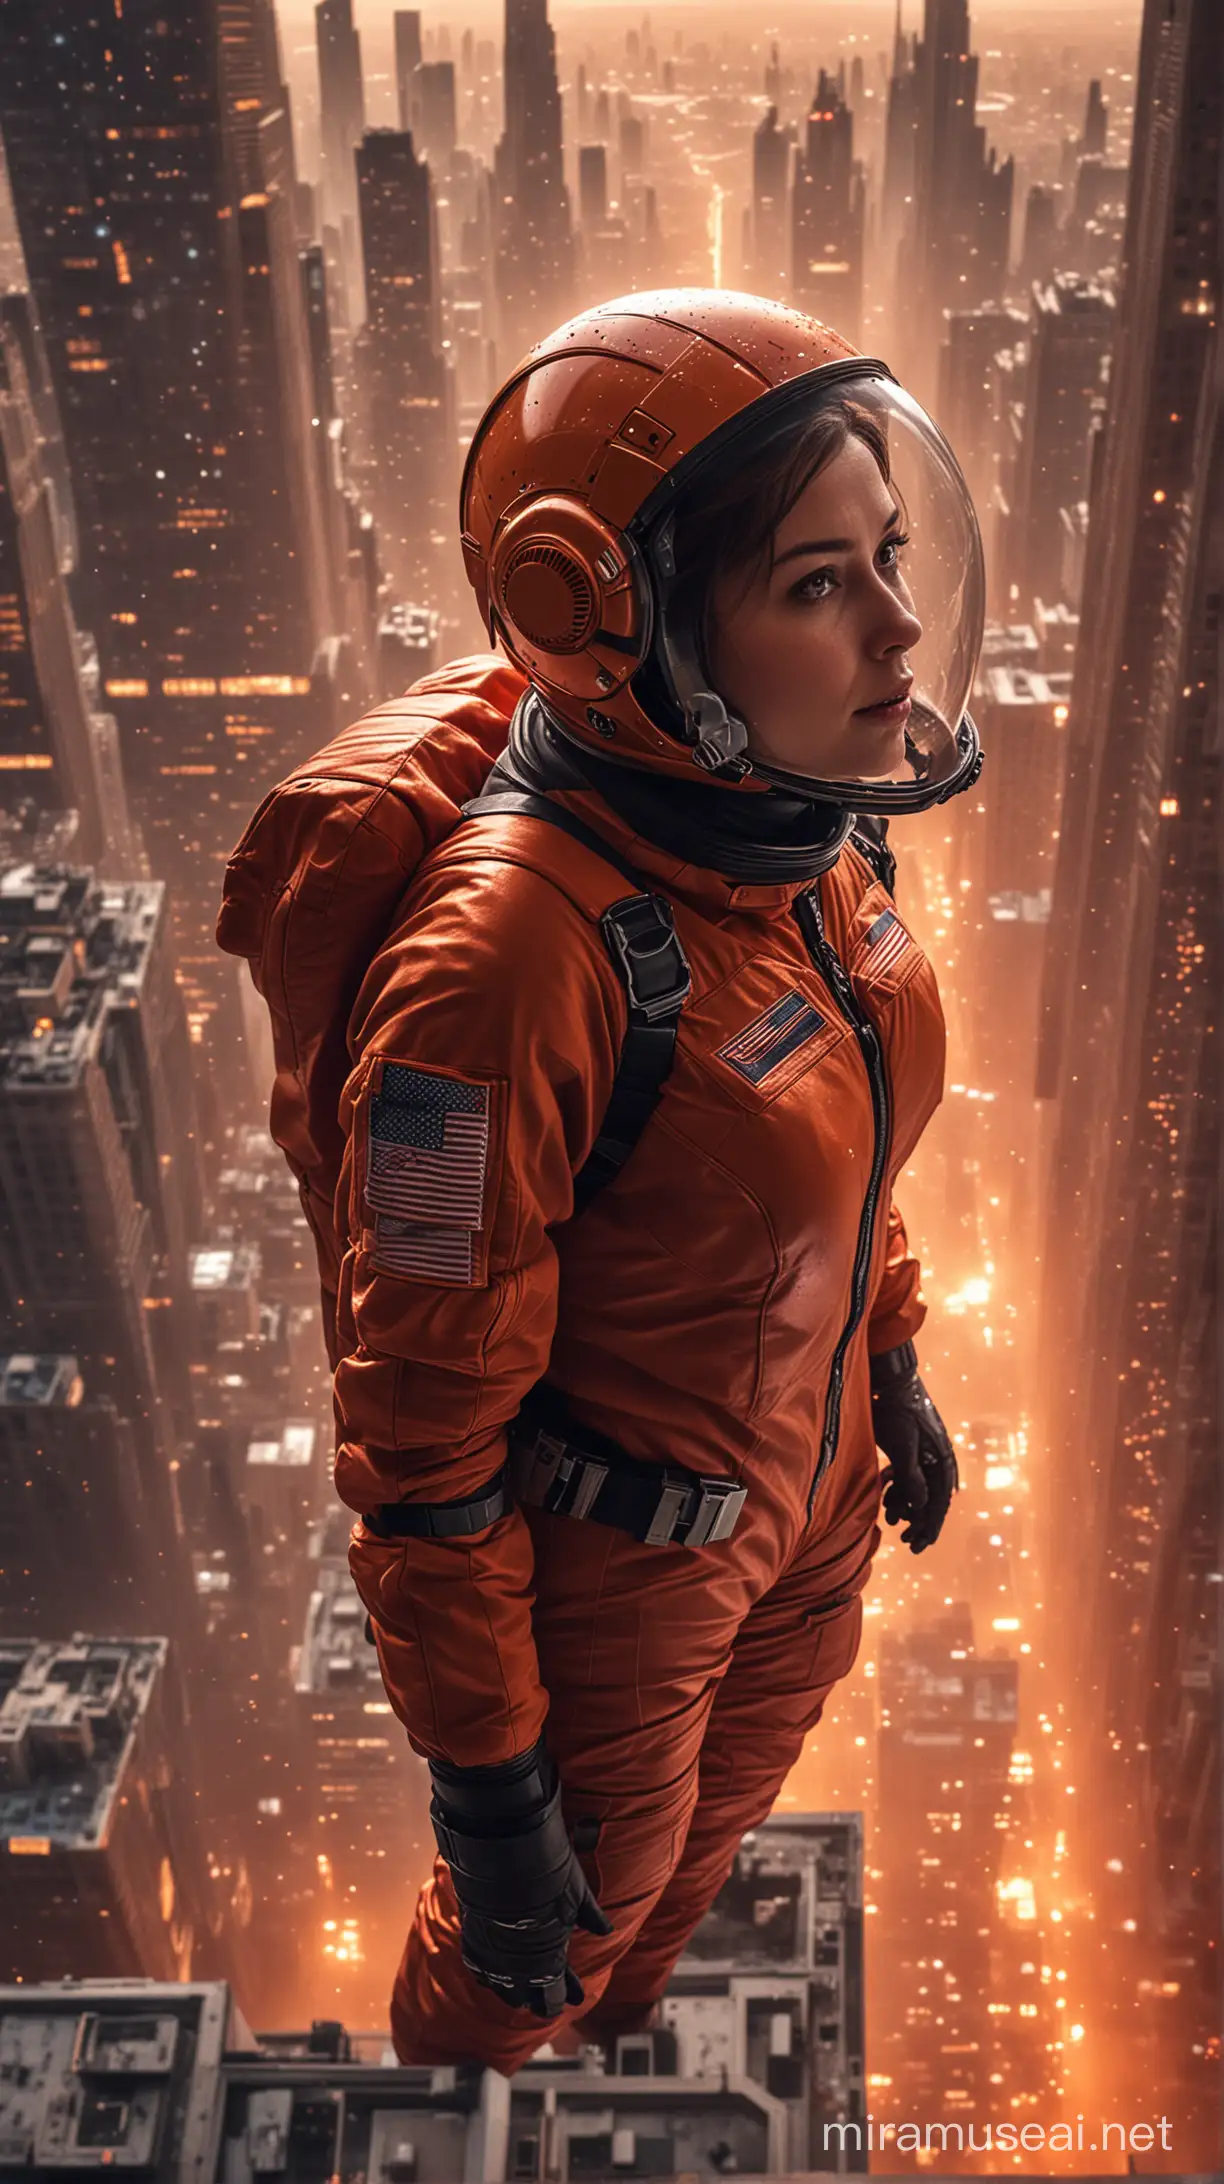 Astronaut Woman Floating over City in Space Helmet and Red Suit